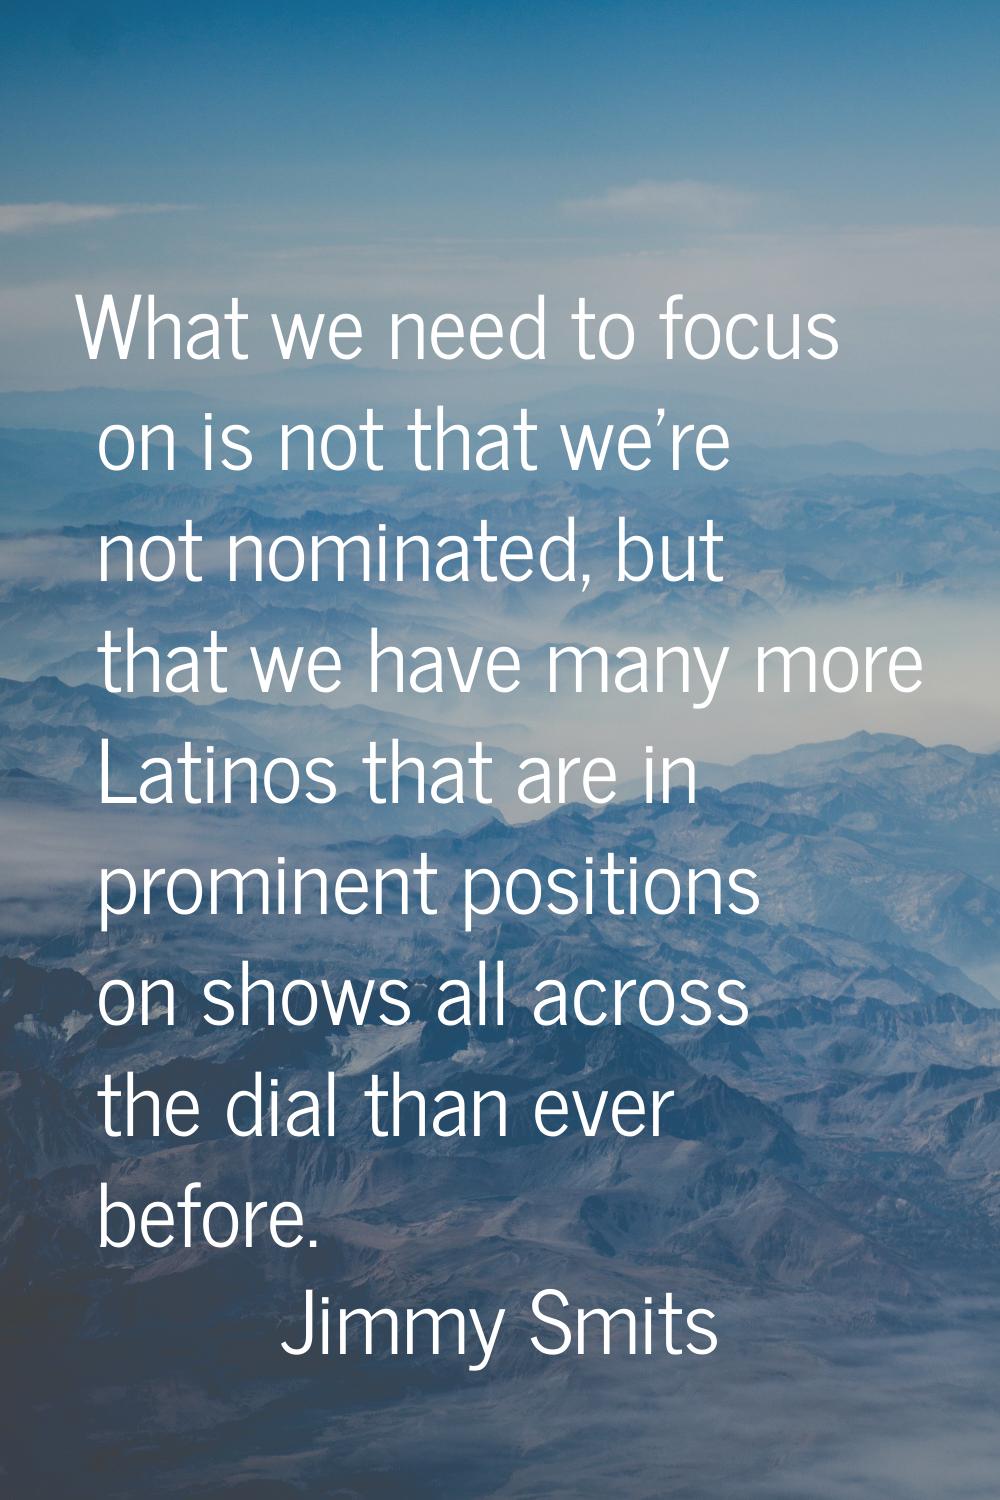 What we need to focus on is not that we're not nominated, but that we have many more Latinos that a